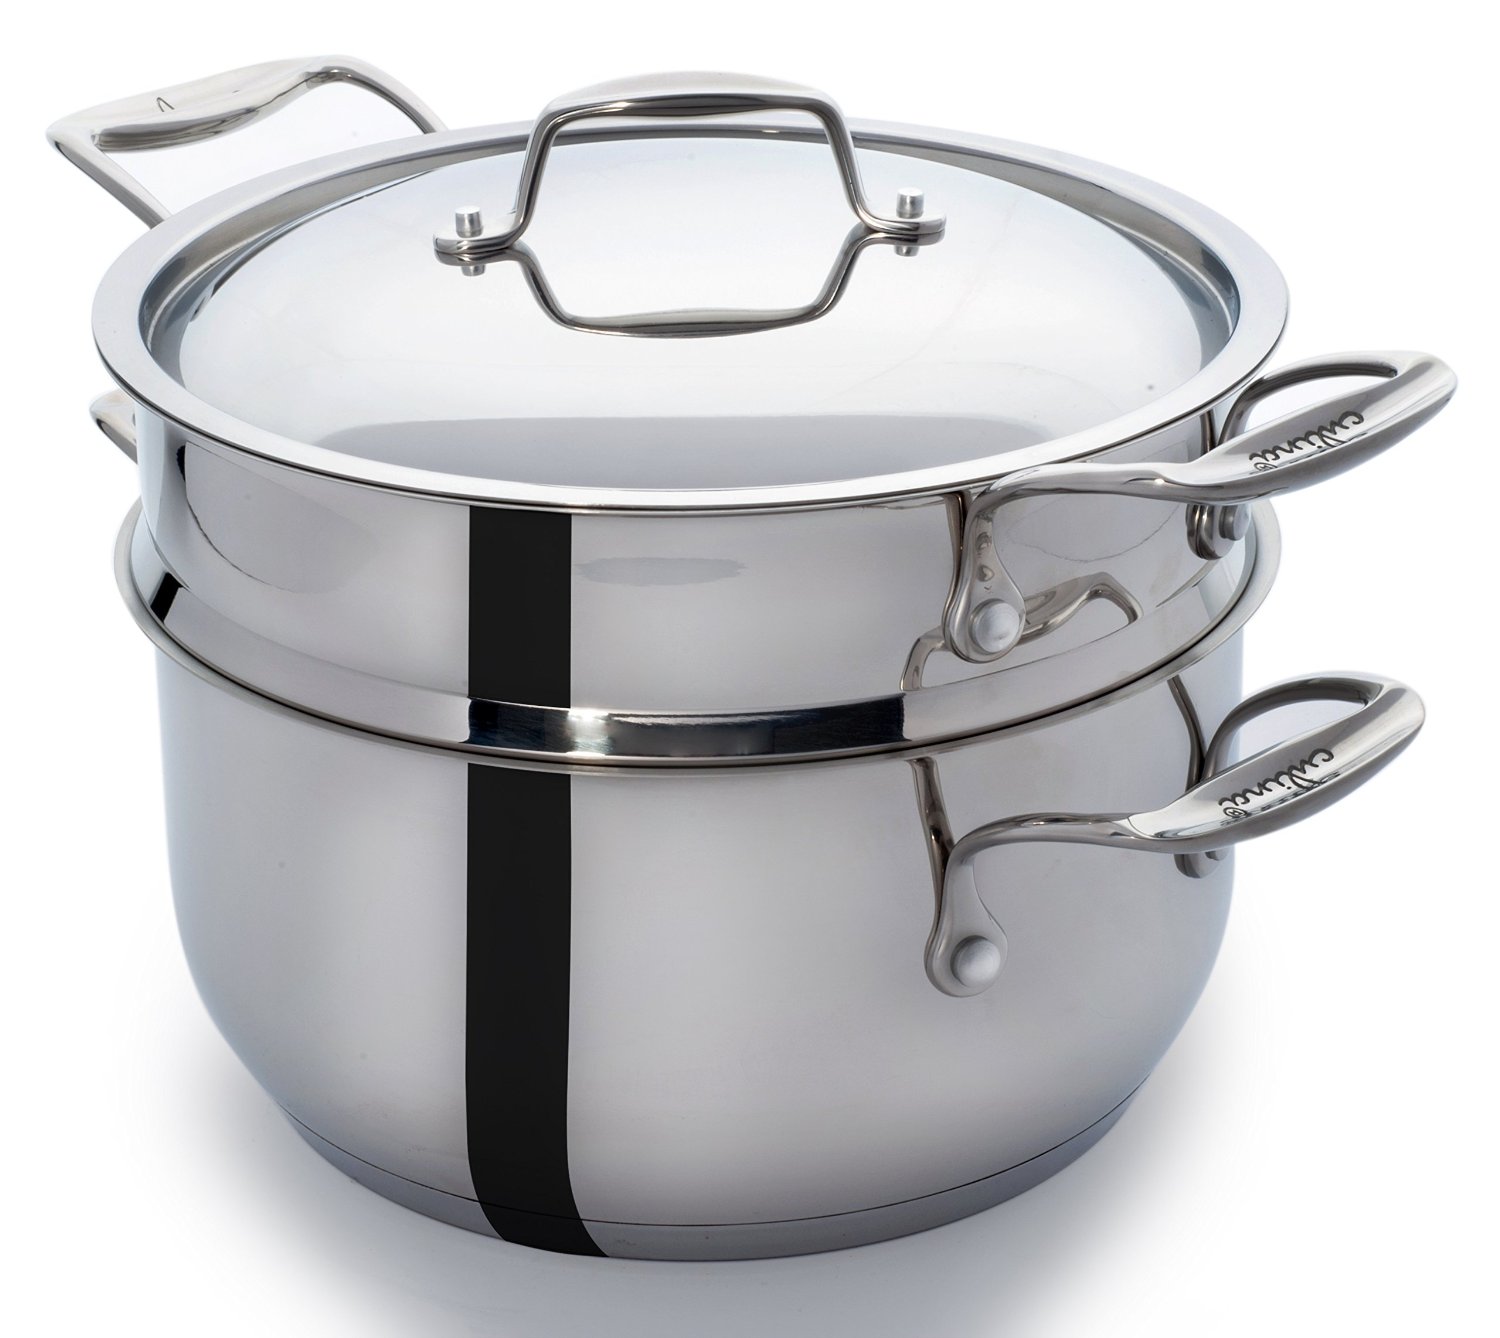 Culina 18 10 Stainless Steel 5 Quart Pot With Steamer Insert 